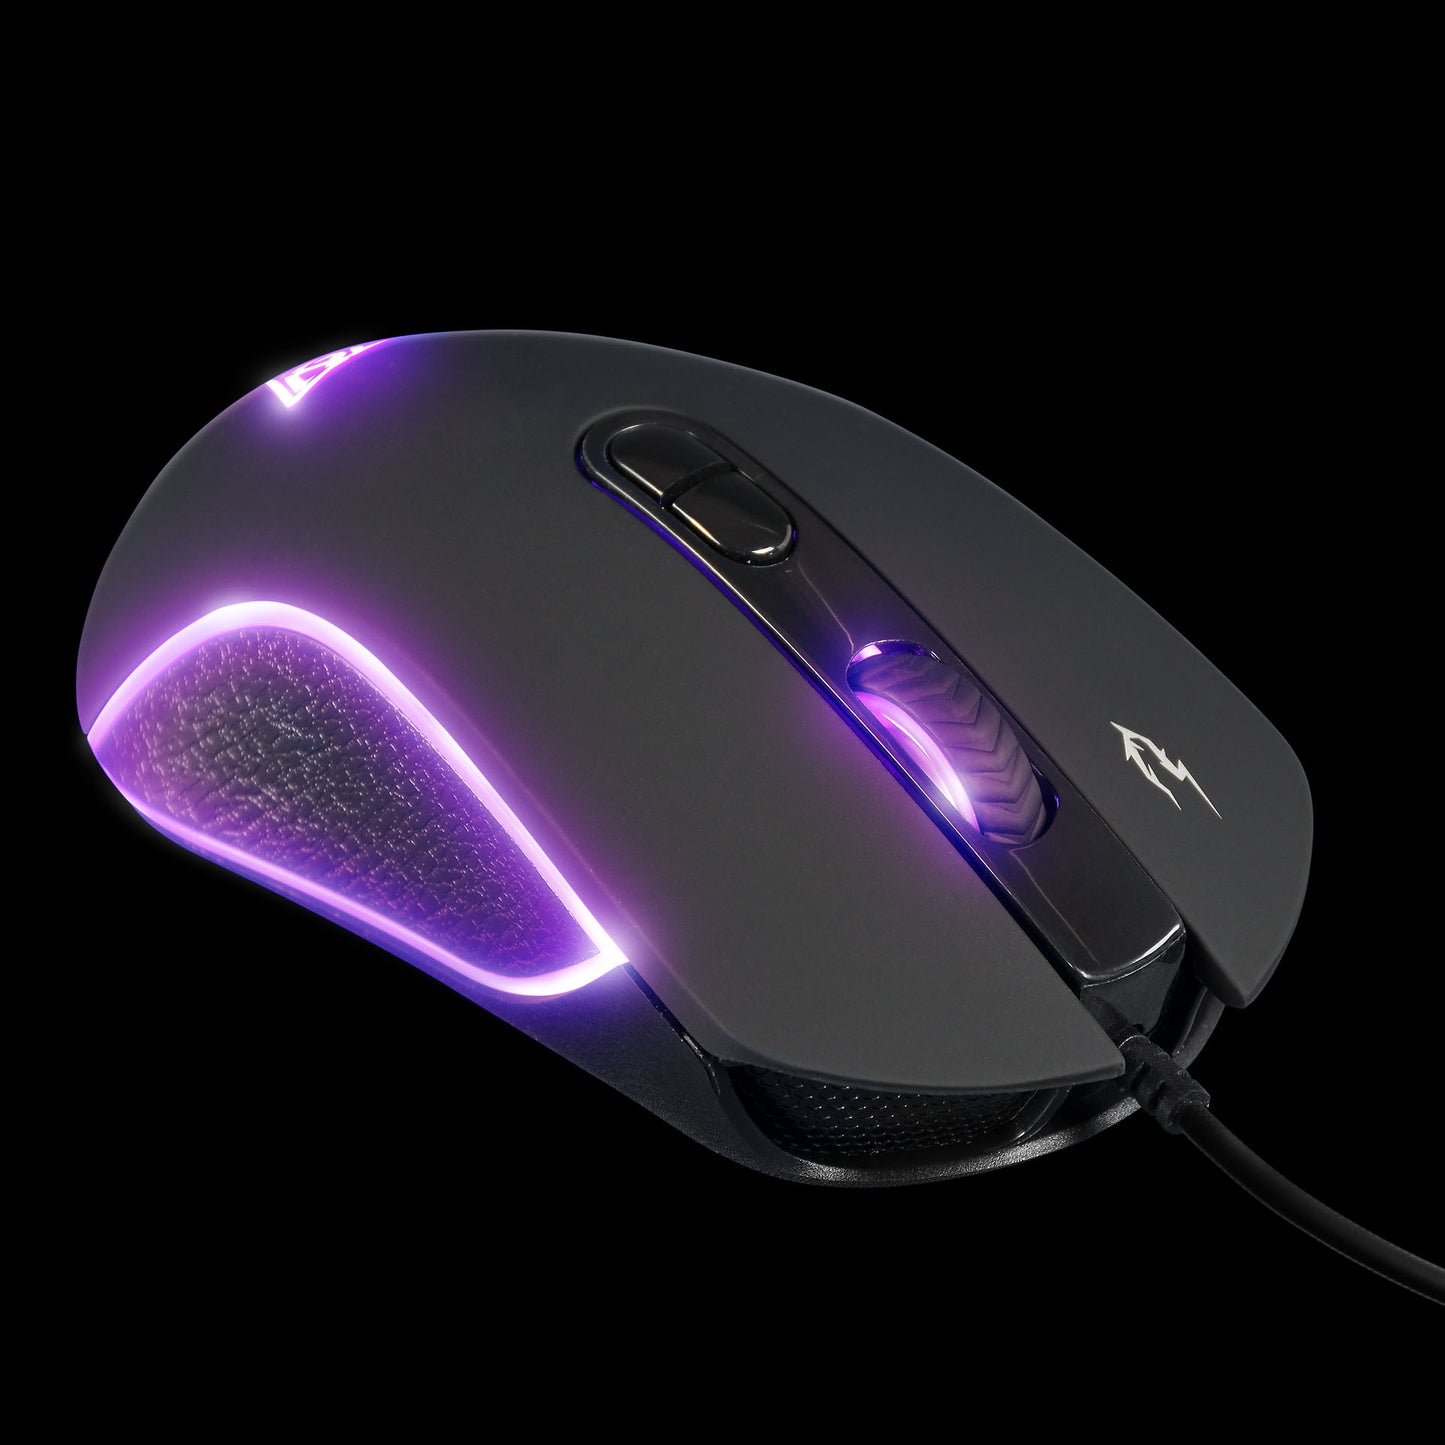 Gamdias Zeus E3 RGB Wired Gaming Mouse with Mousepad